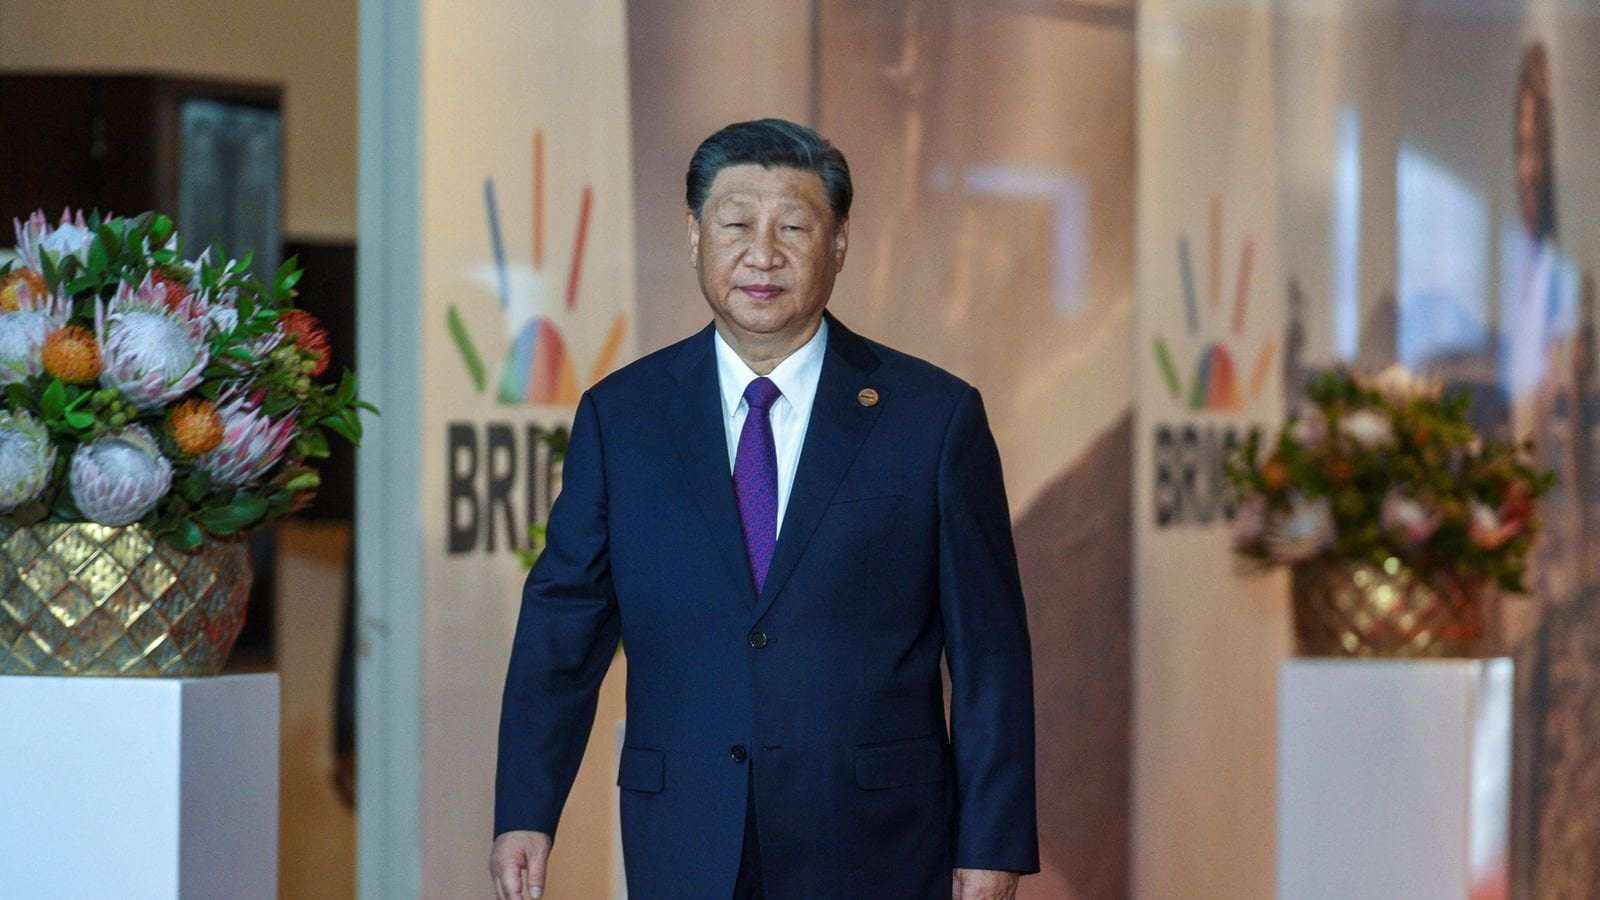 image for Xi Jinping unexpectedly pulls out of BRICS summit speech in 'extraordinary' move